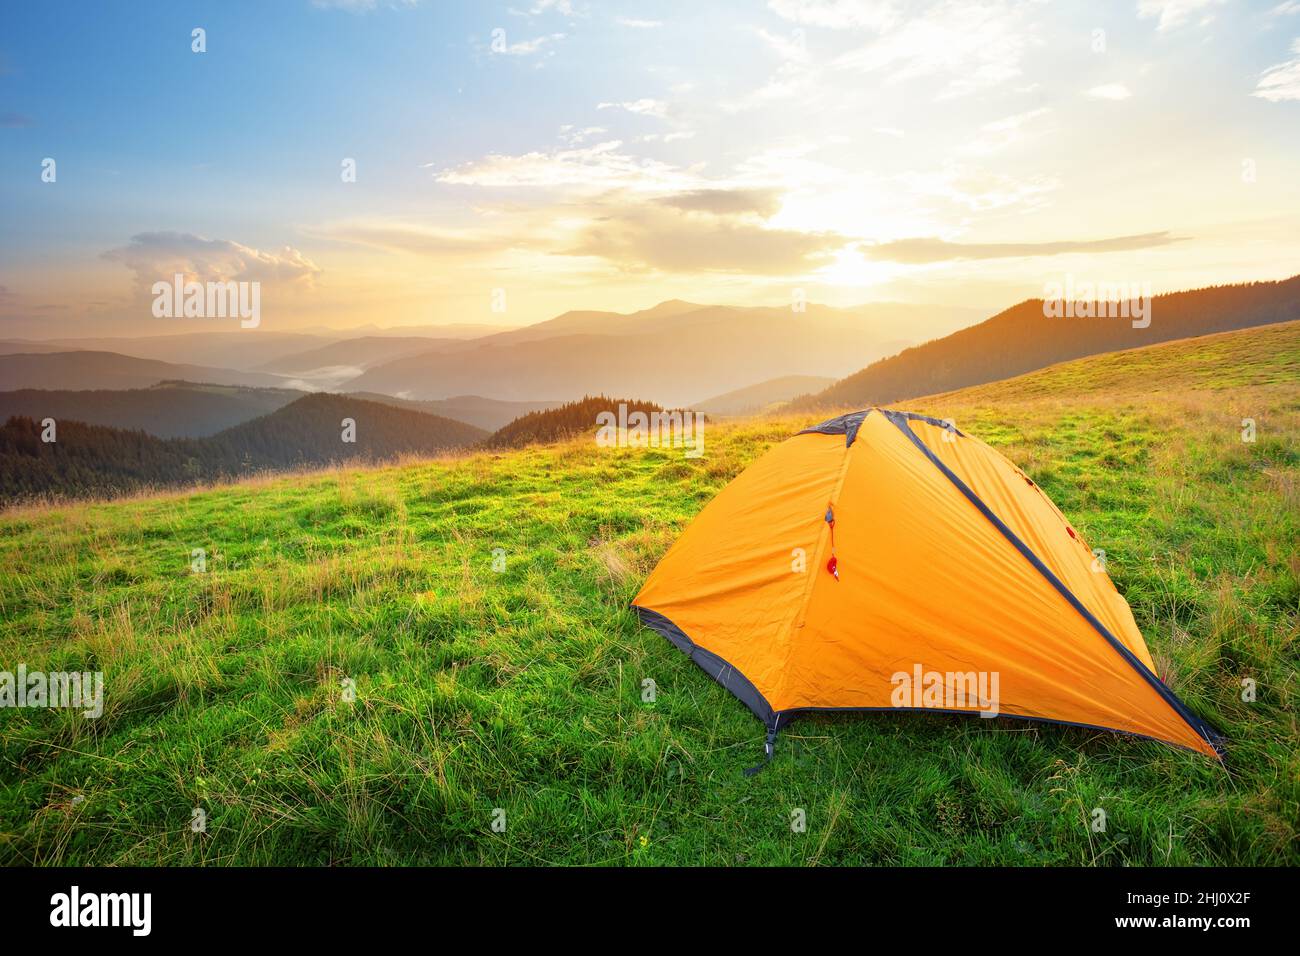 Orange tourist tent in the mountains on a meadow with green grass Stock Photo